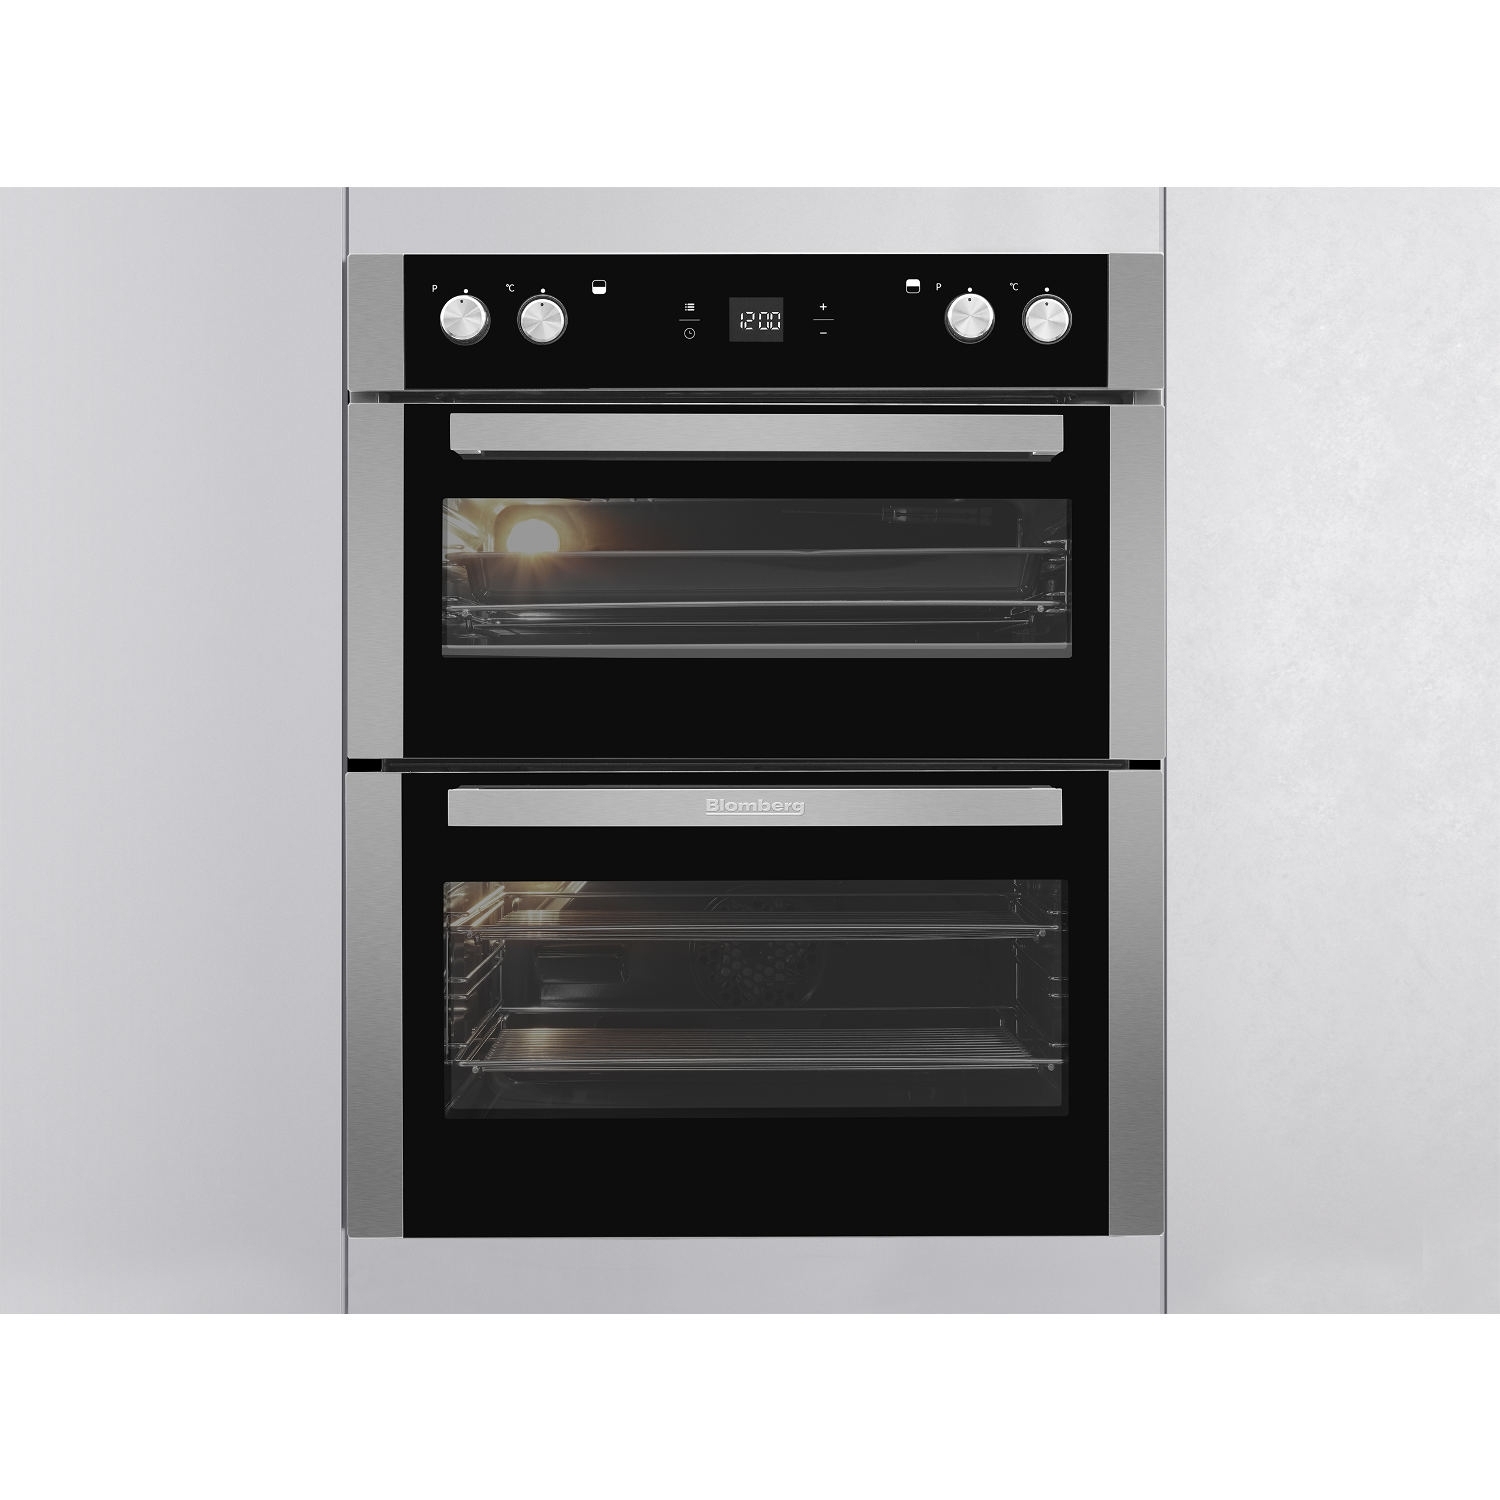 Blomberg OTN9302X Built Under Electric Double Oven - Stainless Steel - 0